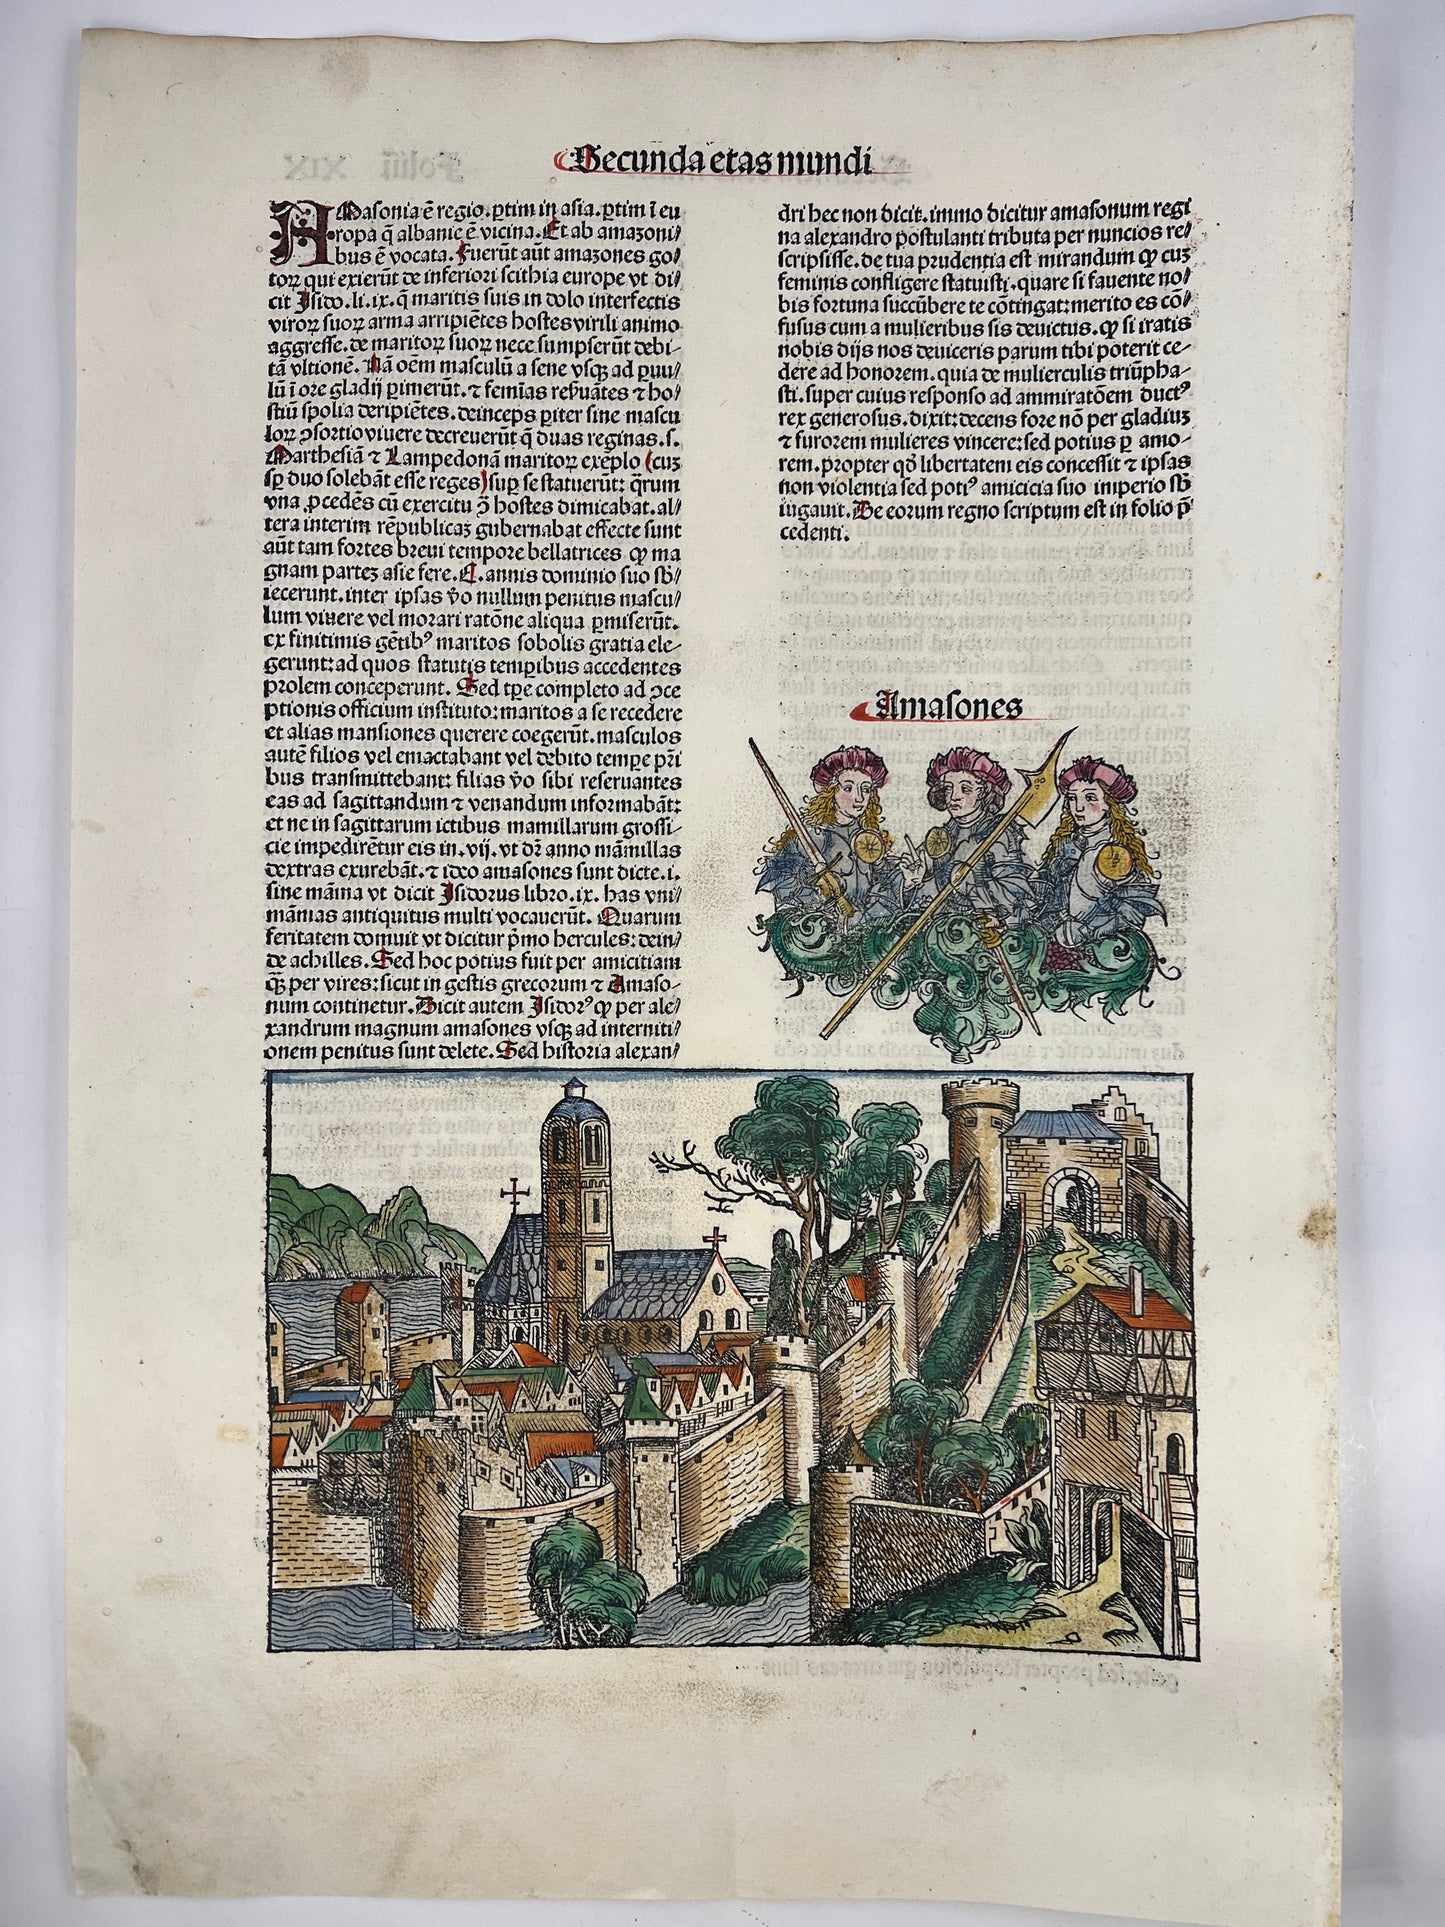 1493 Incunabula Leaf From the Nuremberg Chronicle of Hartmann Schedel - Ancient Amazonian City